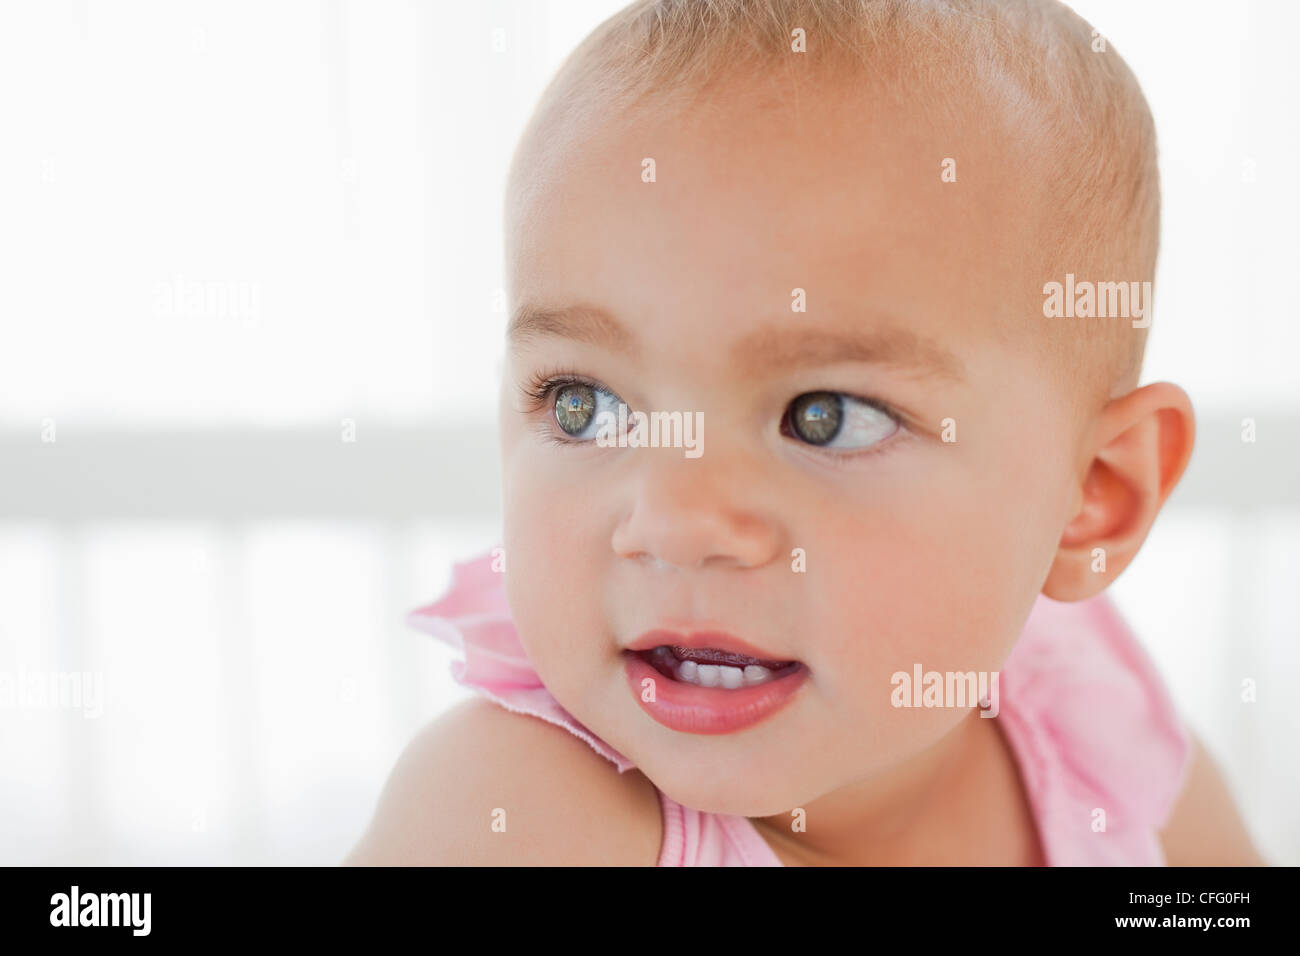 Surprised baby turning her head back Stock Photo